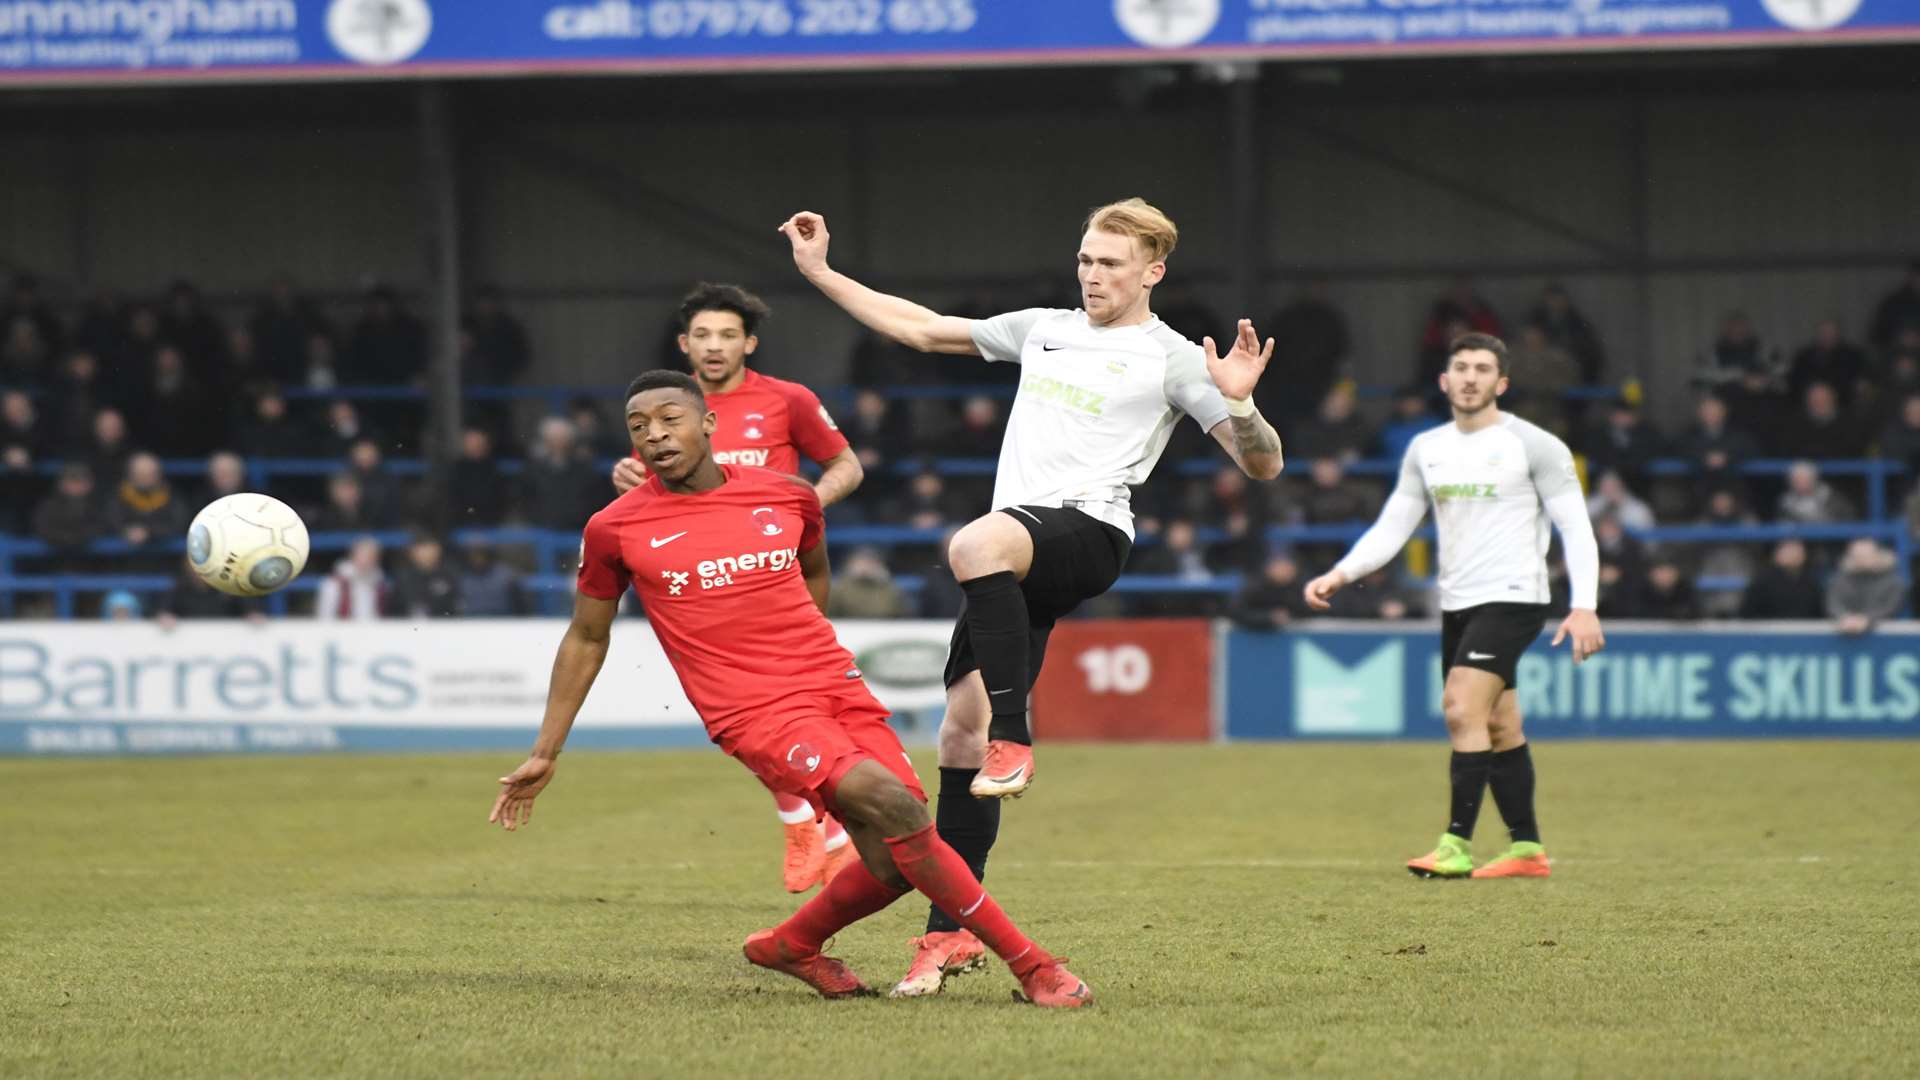 Micth Pinnock playing against Leyton Orient in their FA Trophy clash in February